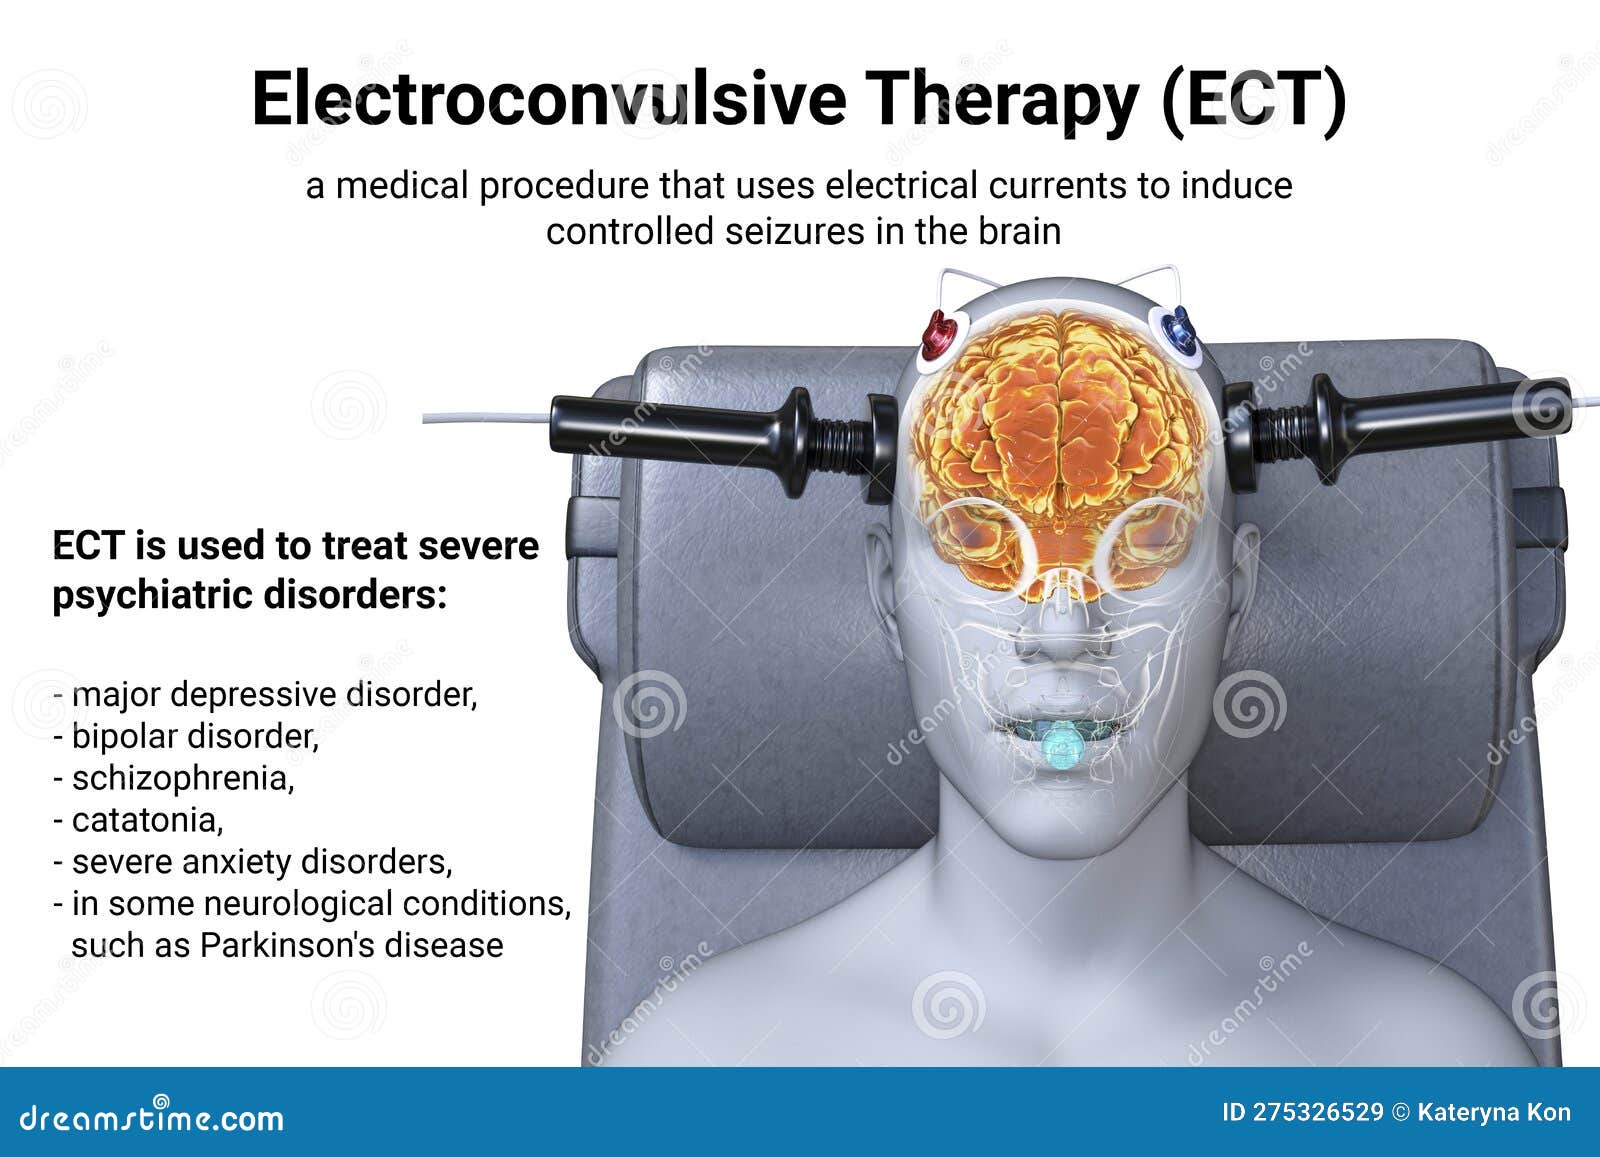 thesis on electroconvulsive therapy